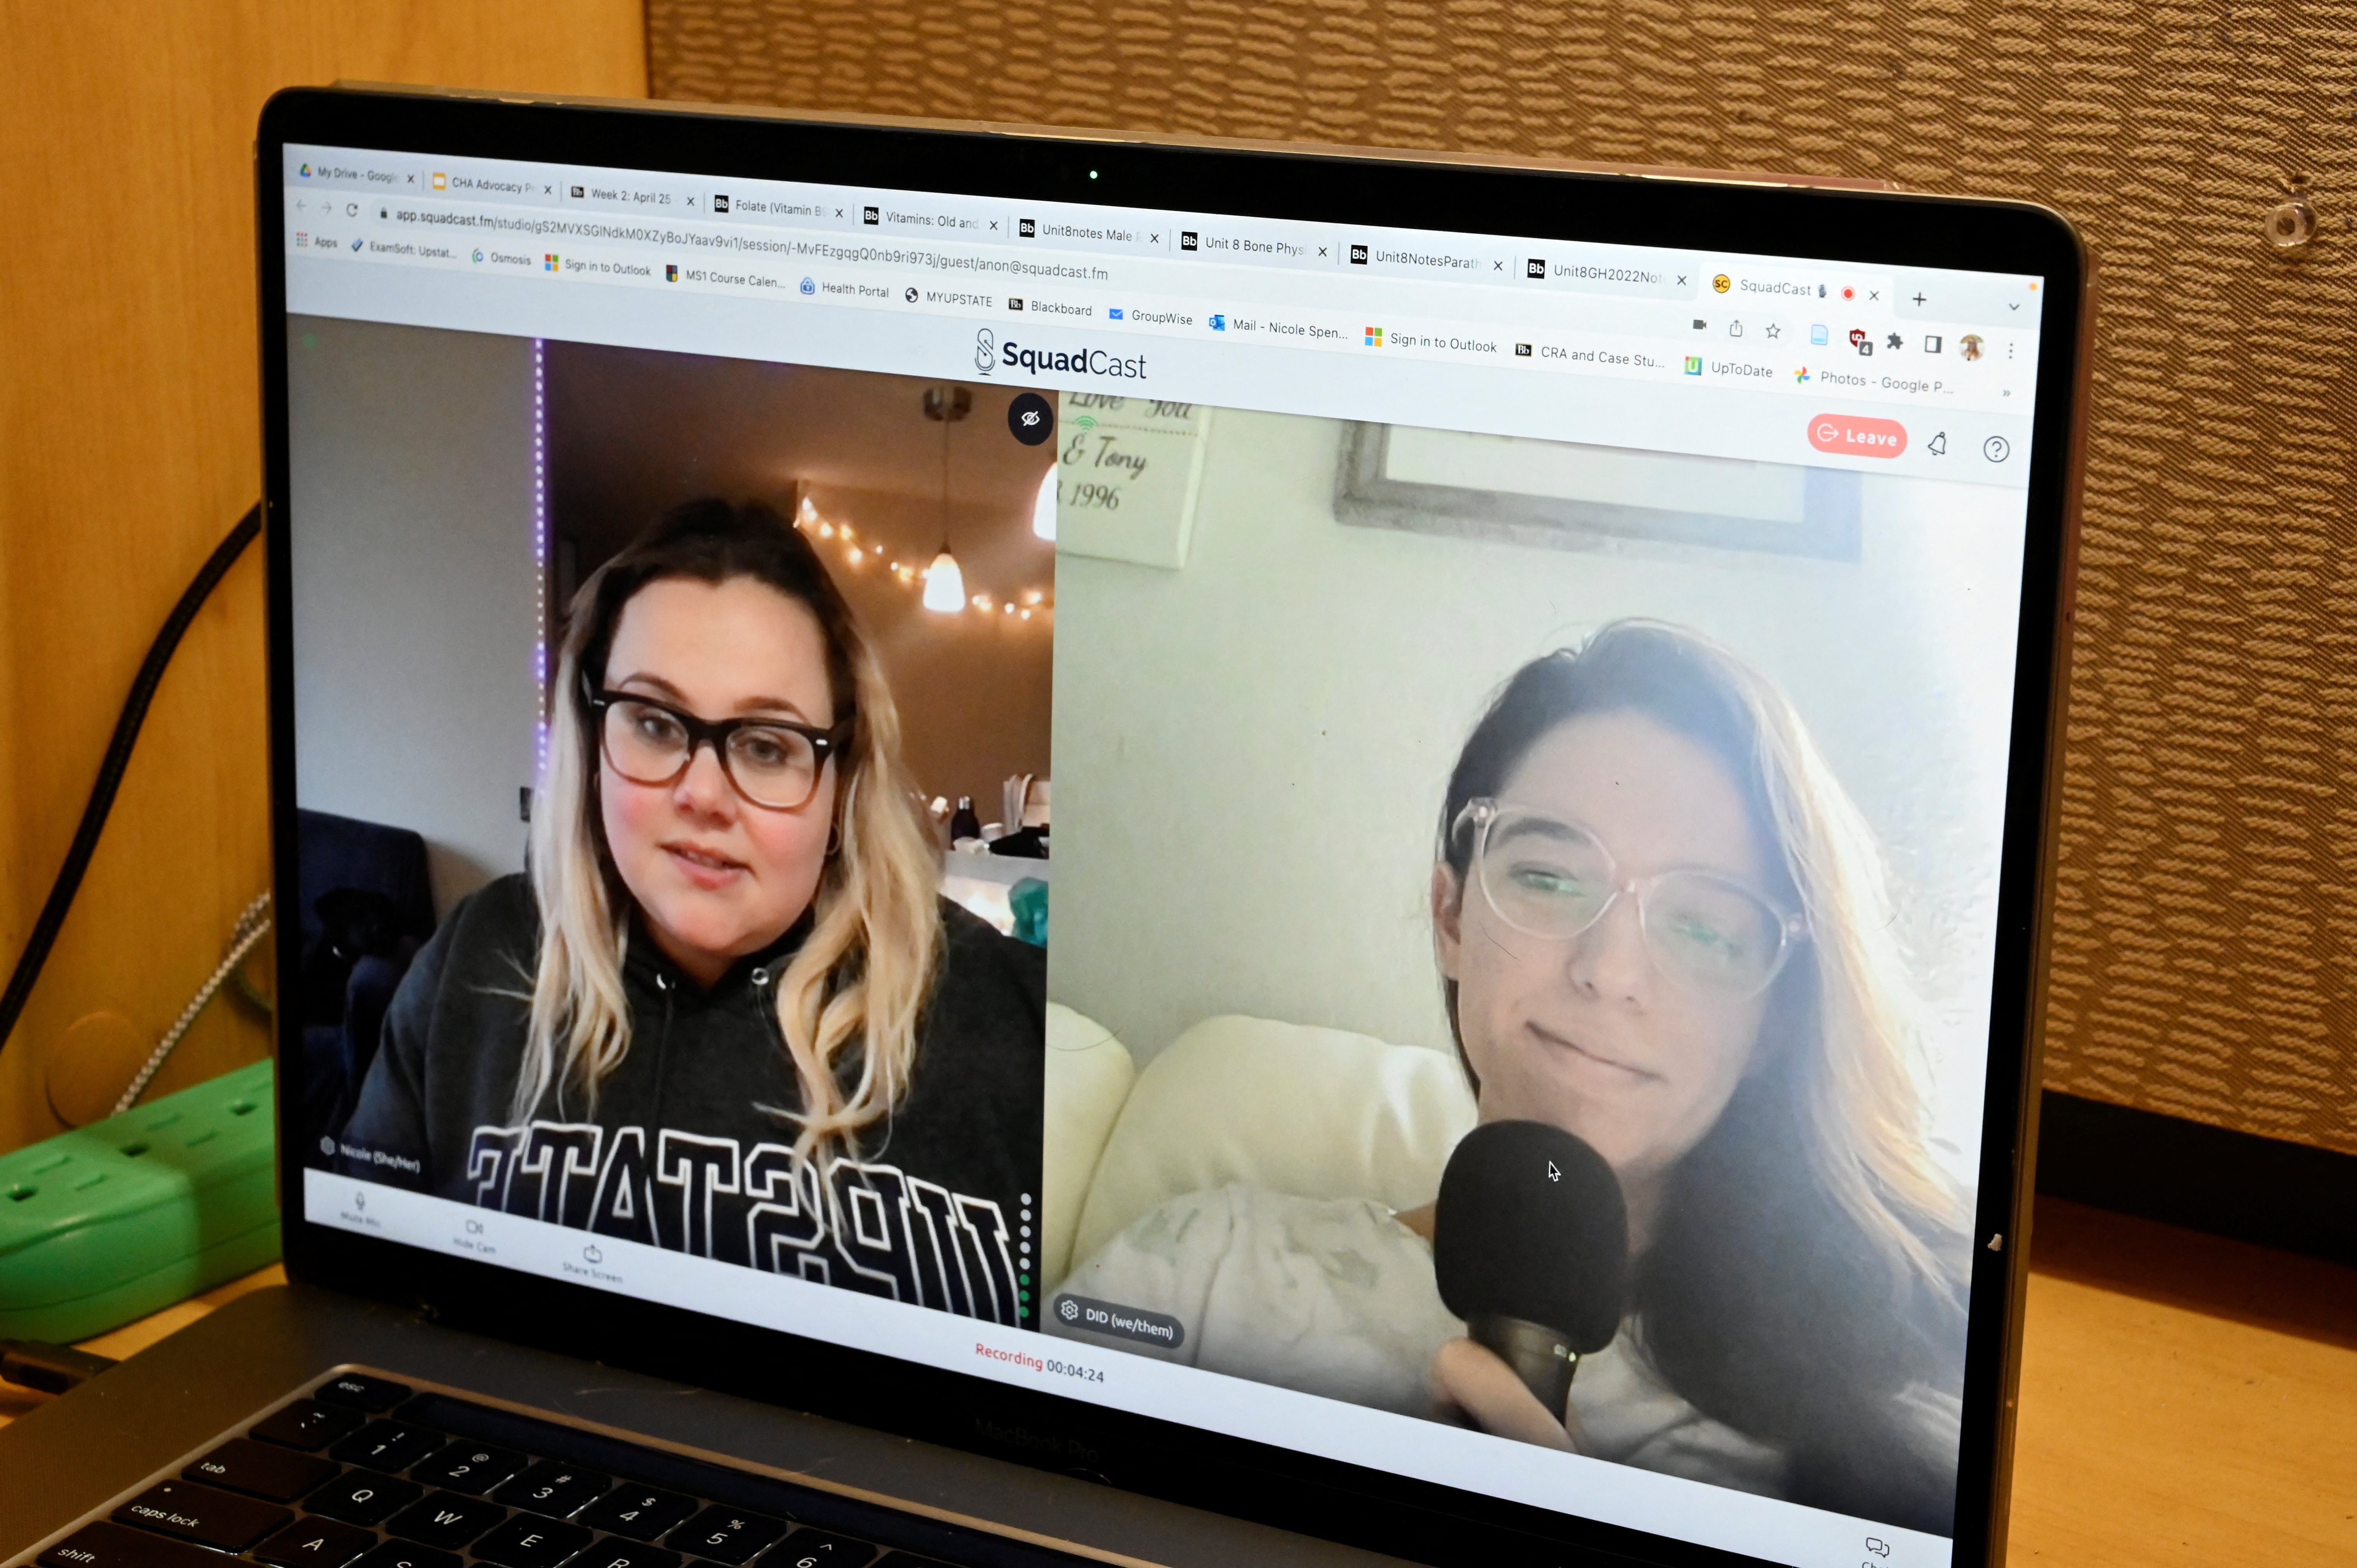 Haley Carey, who also has POTS, interviews Nicole about her medical condition. They met through social media, share similar symptoms and support each other